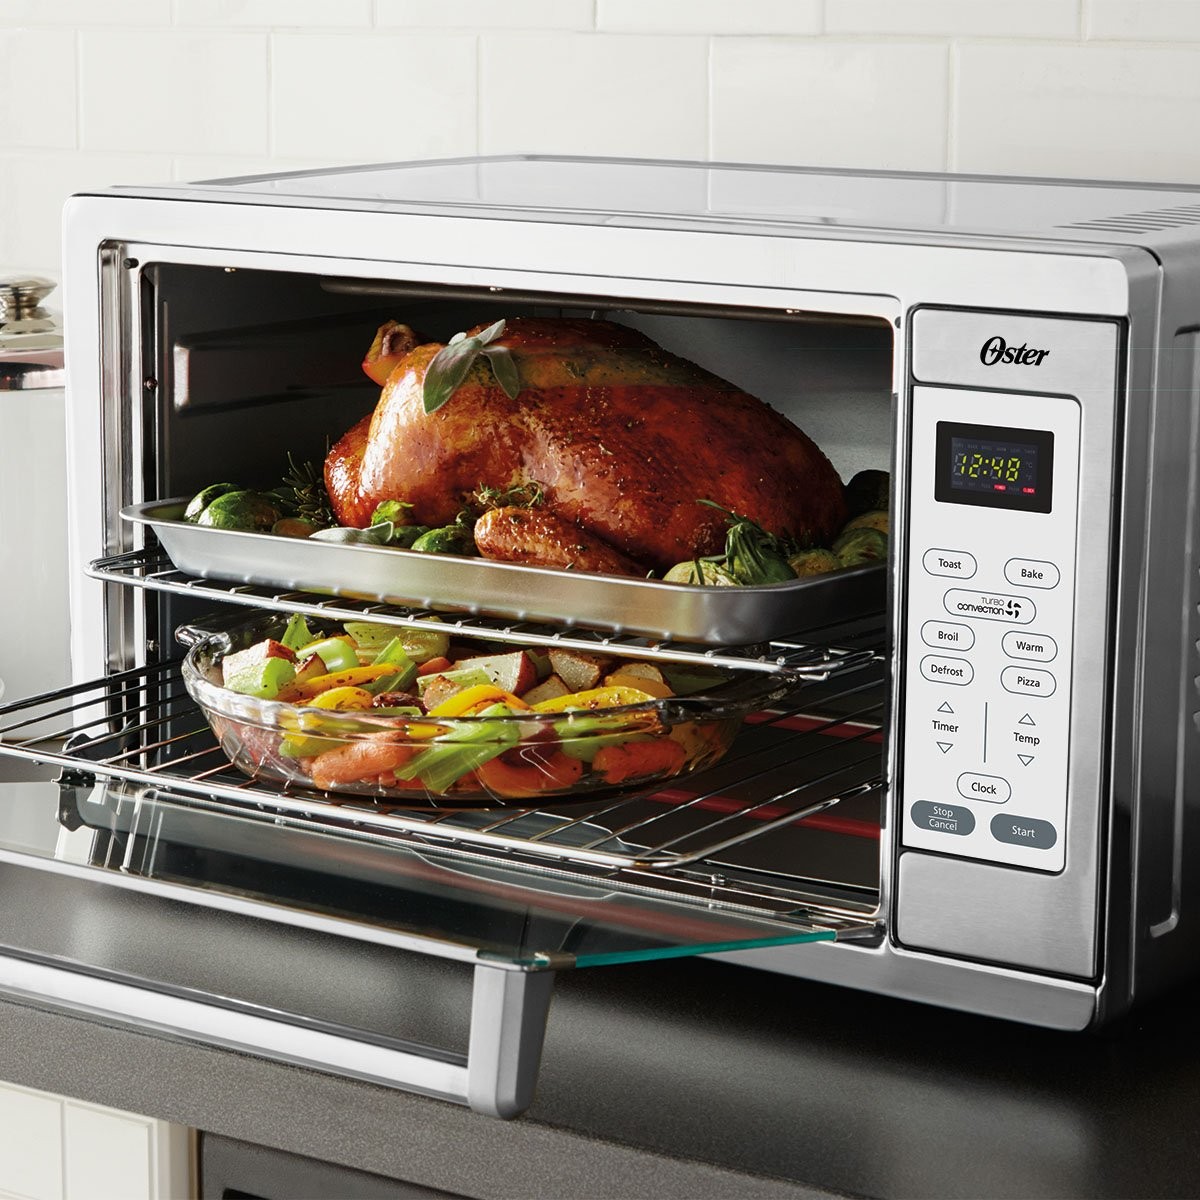 countertop convection oven large
 Extra Large Convection Countertop Oven Designed For Life ..